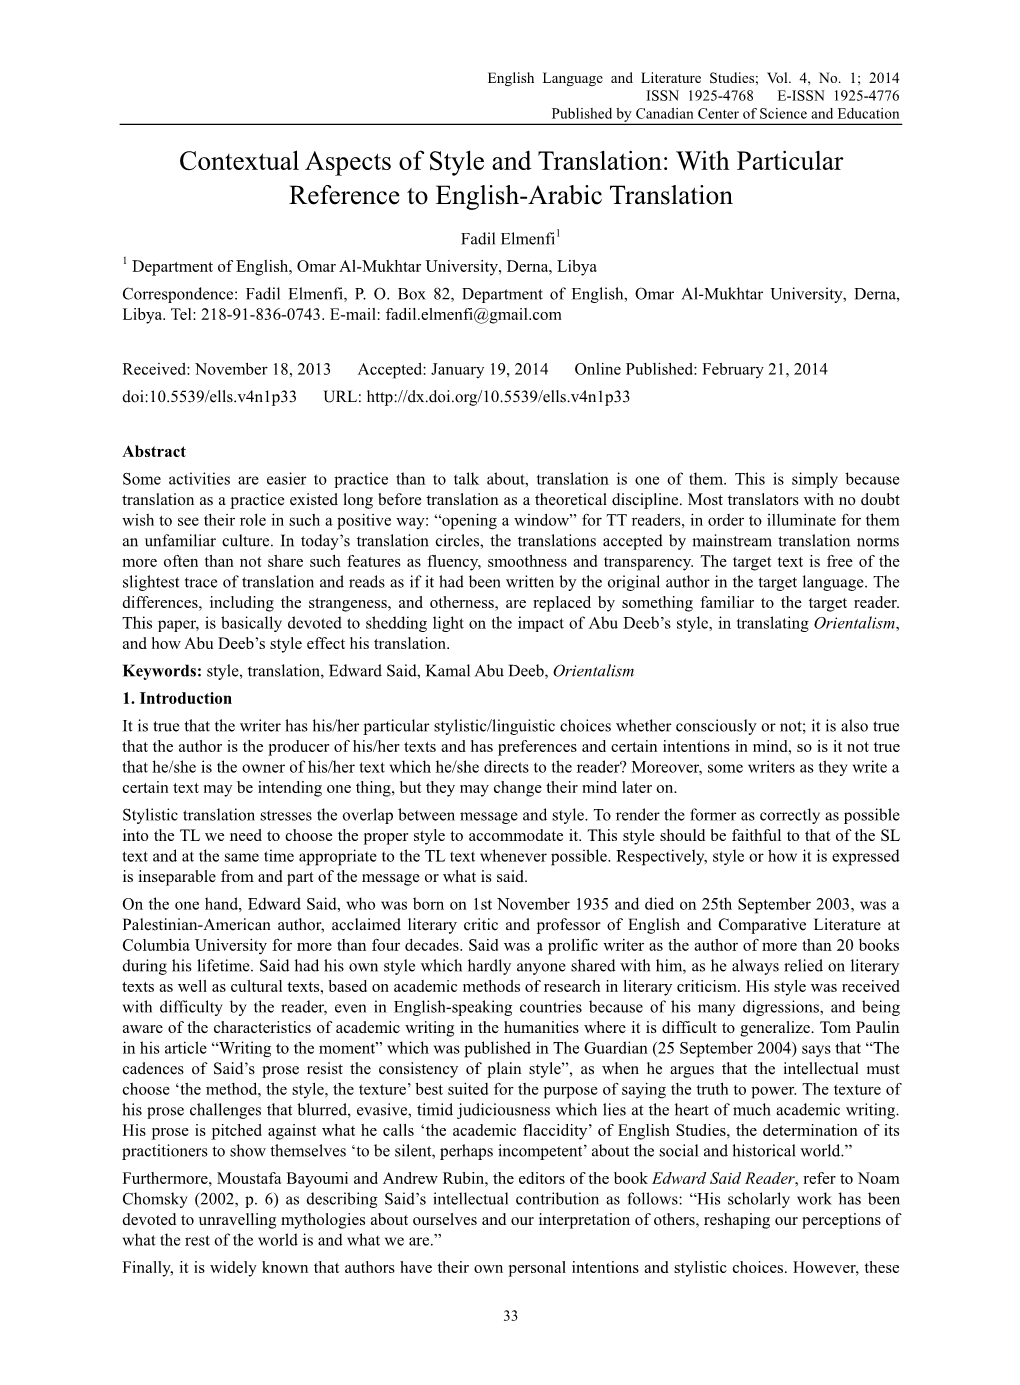 Contextual Aspects of Style and Translation: with Particular Reference to English-Arabic Translation